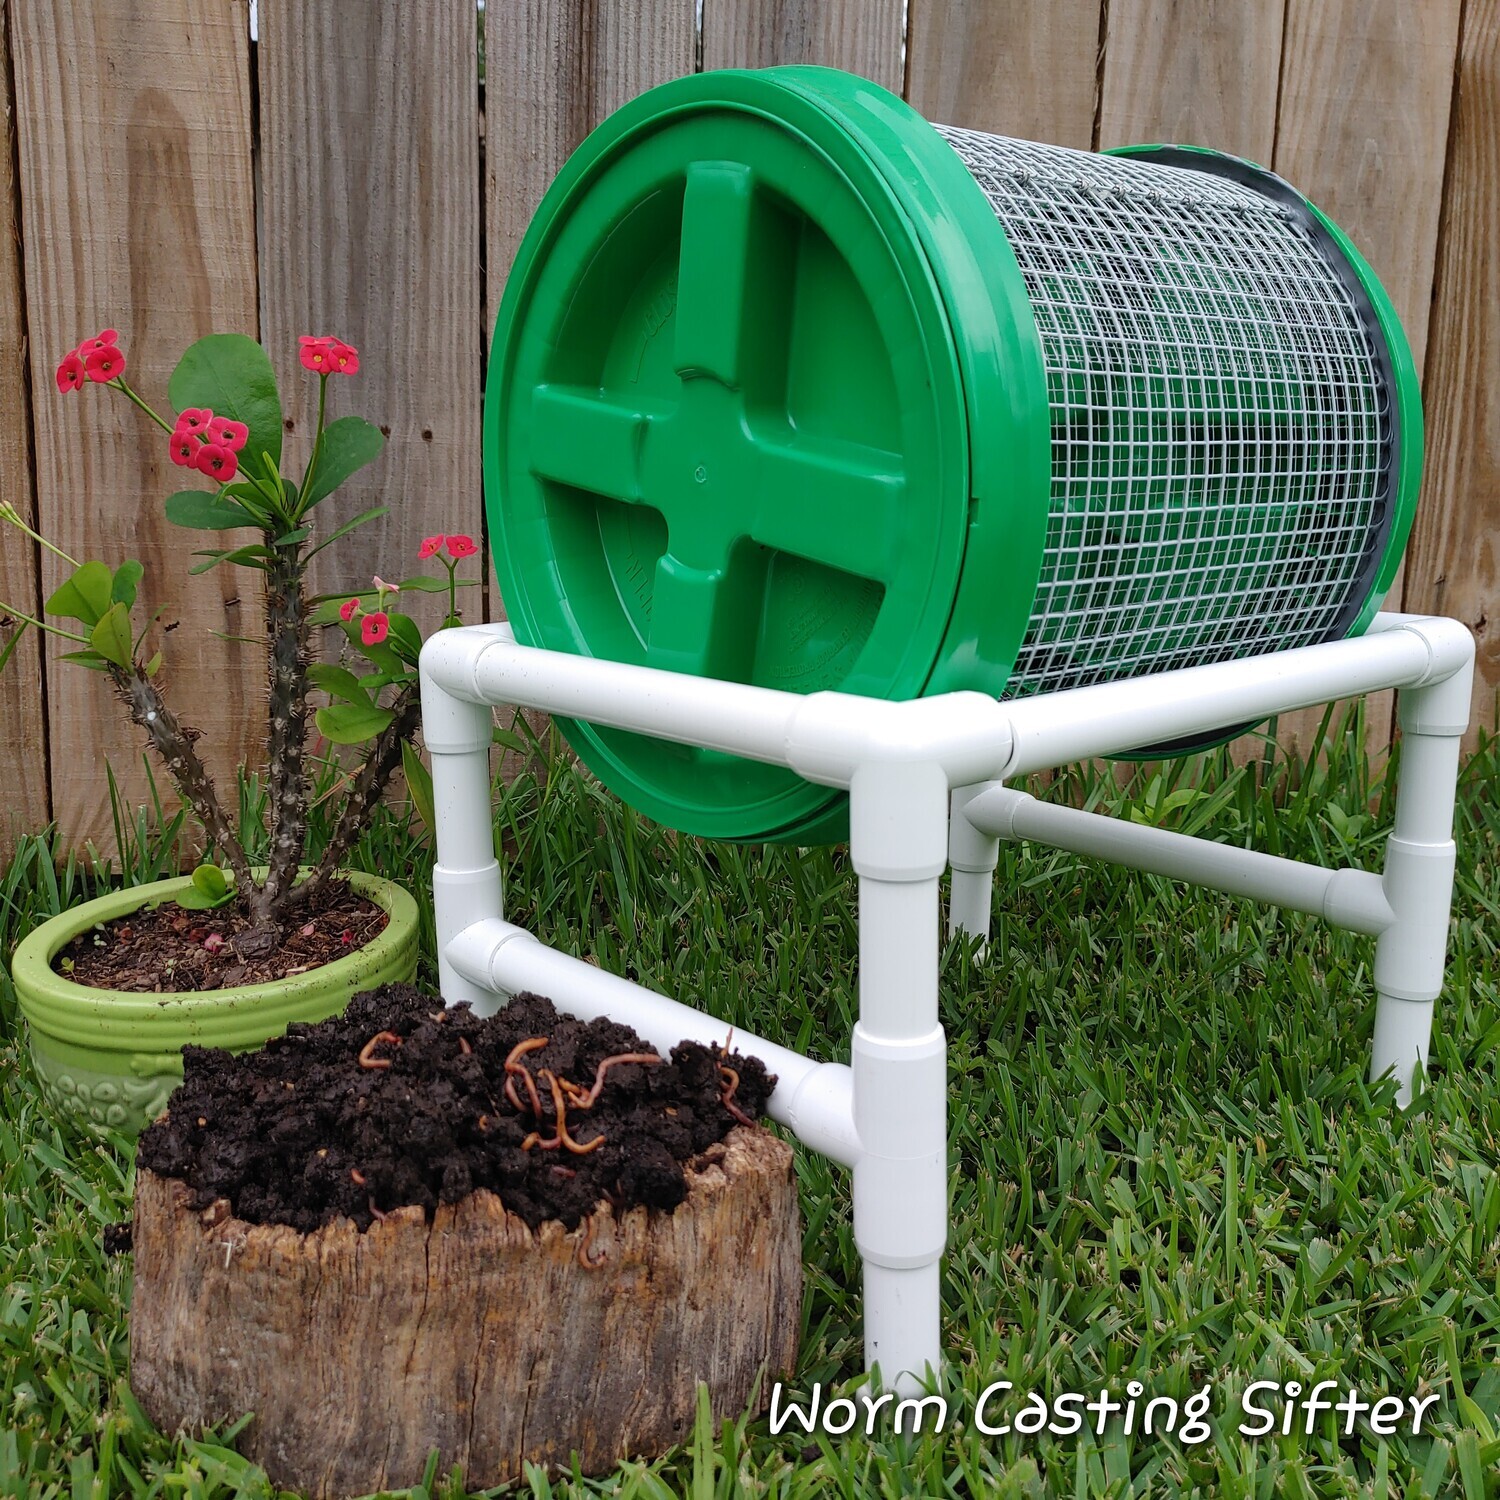 Compact Compost Worm Casting Sifter 1/8 inch screen.